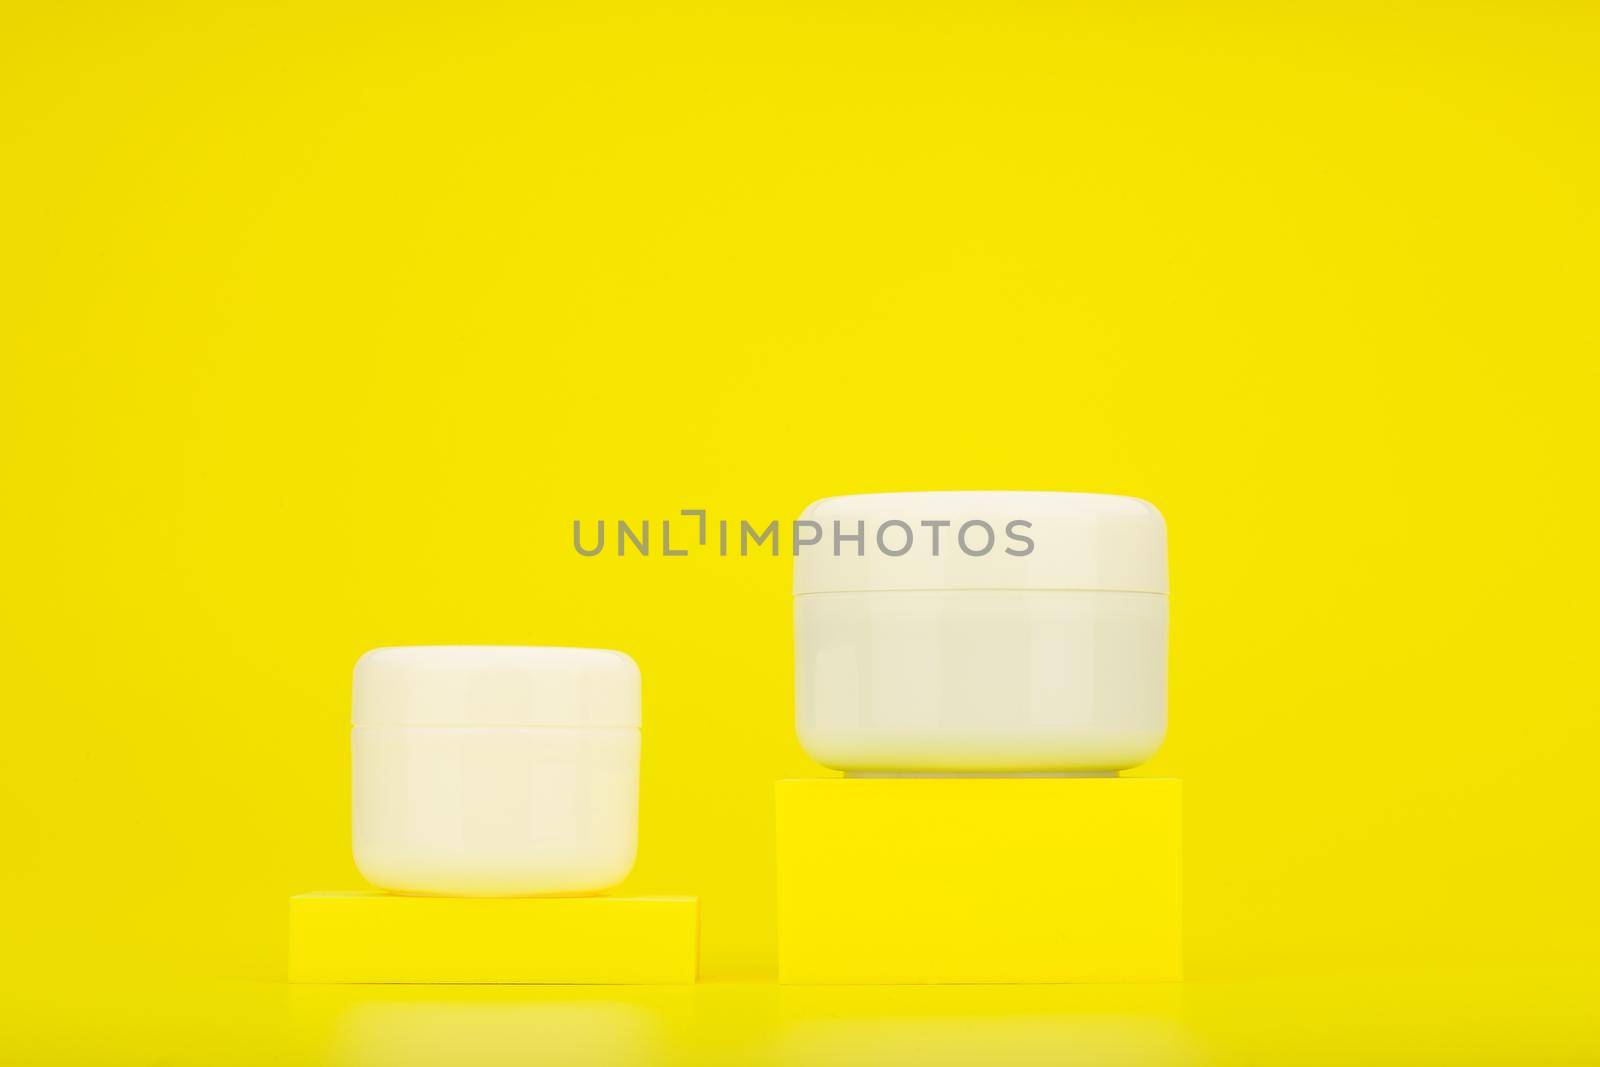 Two unbranded cosmetic jars on yellow podiums against bright yellow background with copy space by Senorina_Irina